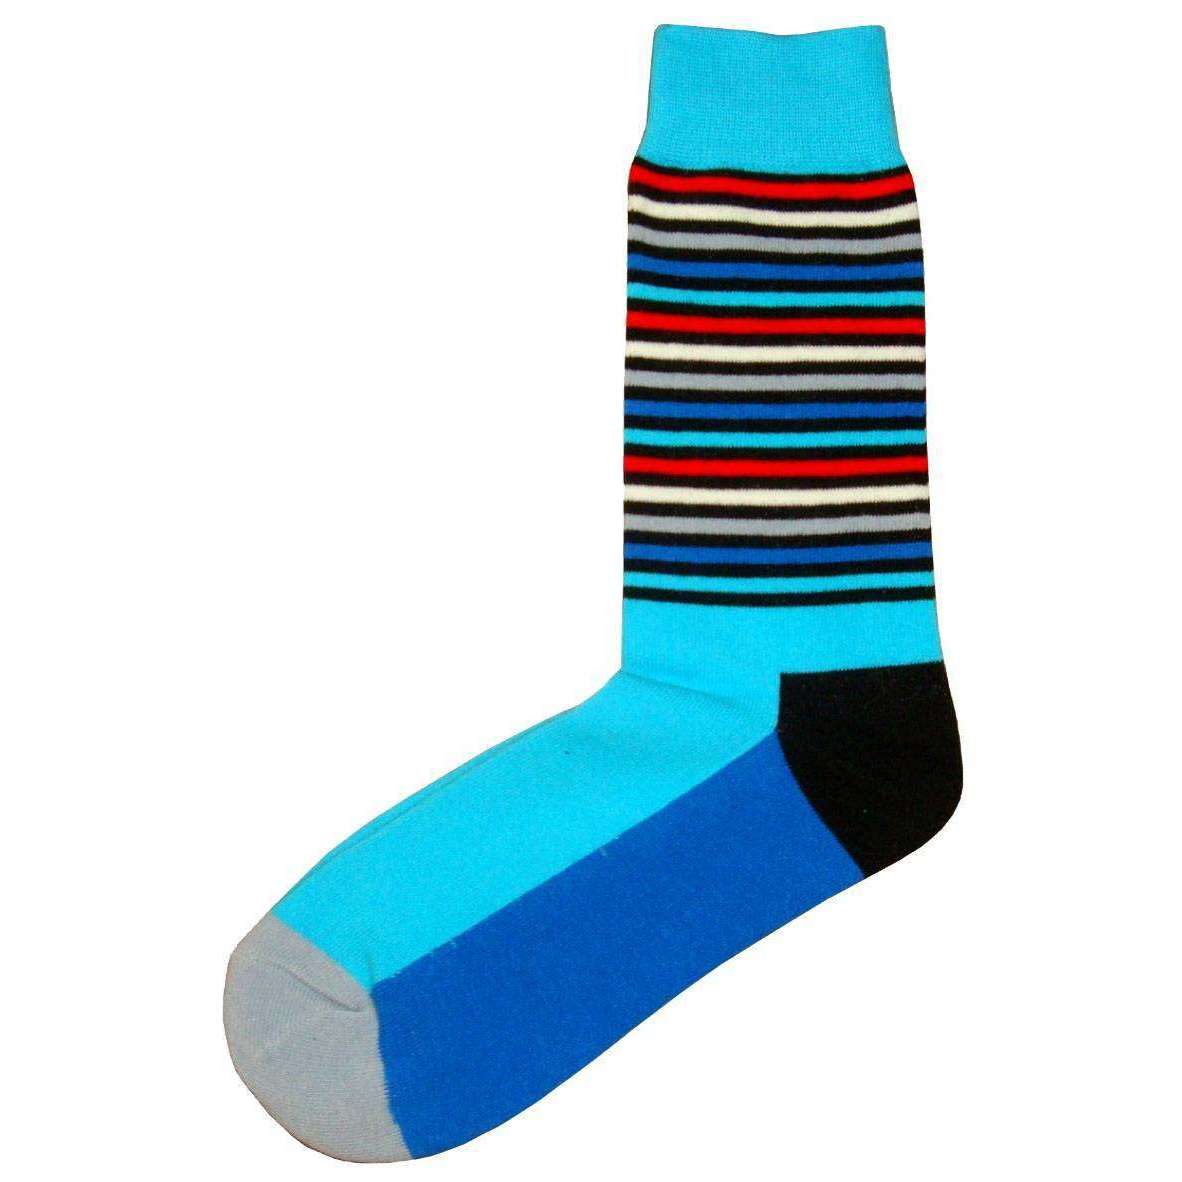 Bassin and Brown Thin Multi Stripe Midcalf Socks - Blue/Red